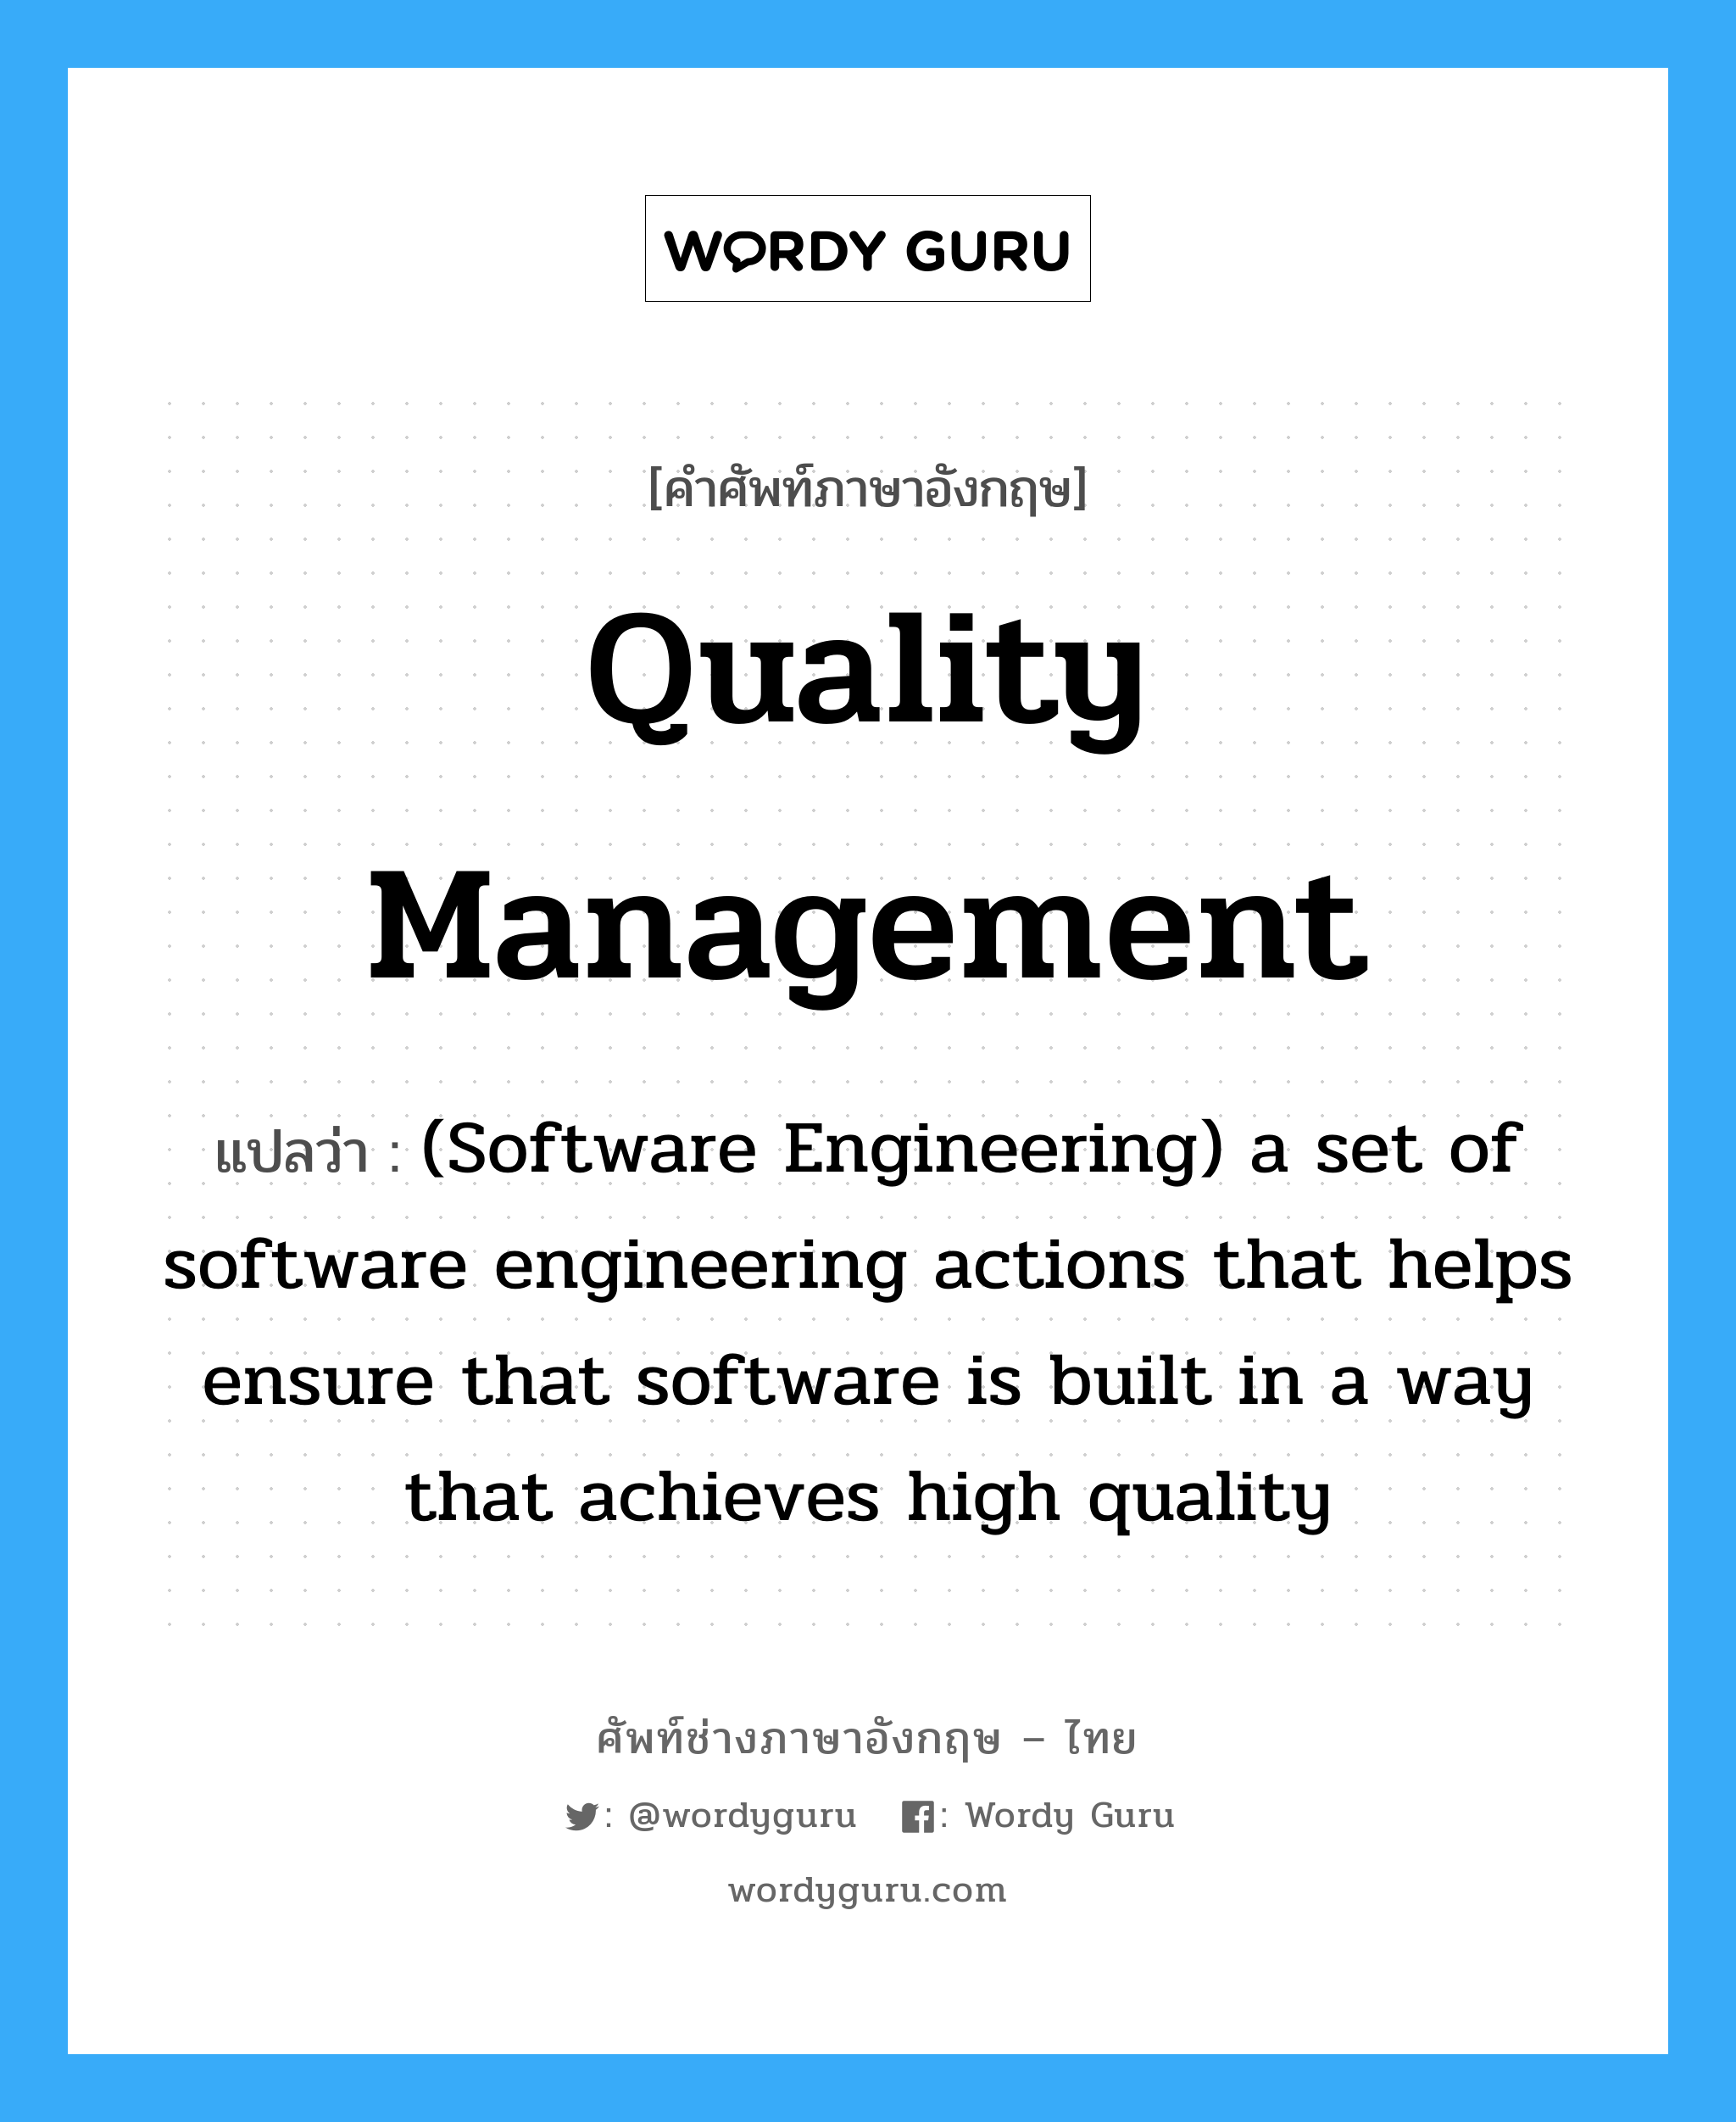 Quality management แปลว่า?, คำศัพท์ช่างภาษาอังกฤษ - ไทย Quality management คำศัพท์ภาษาอังกฤษ Quality management แปลว่า (Software Engineering) a set of software engineering actions that helps ensure that software is built in a way that achieves high quality